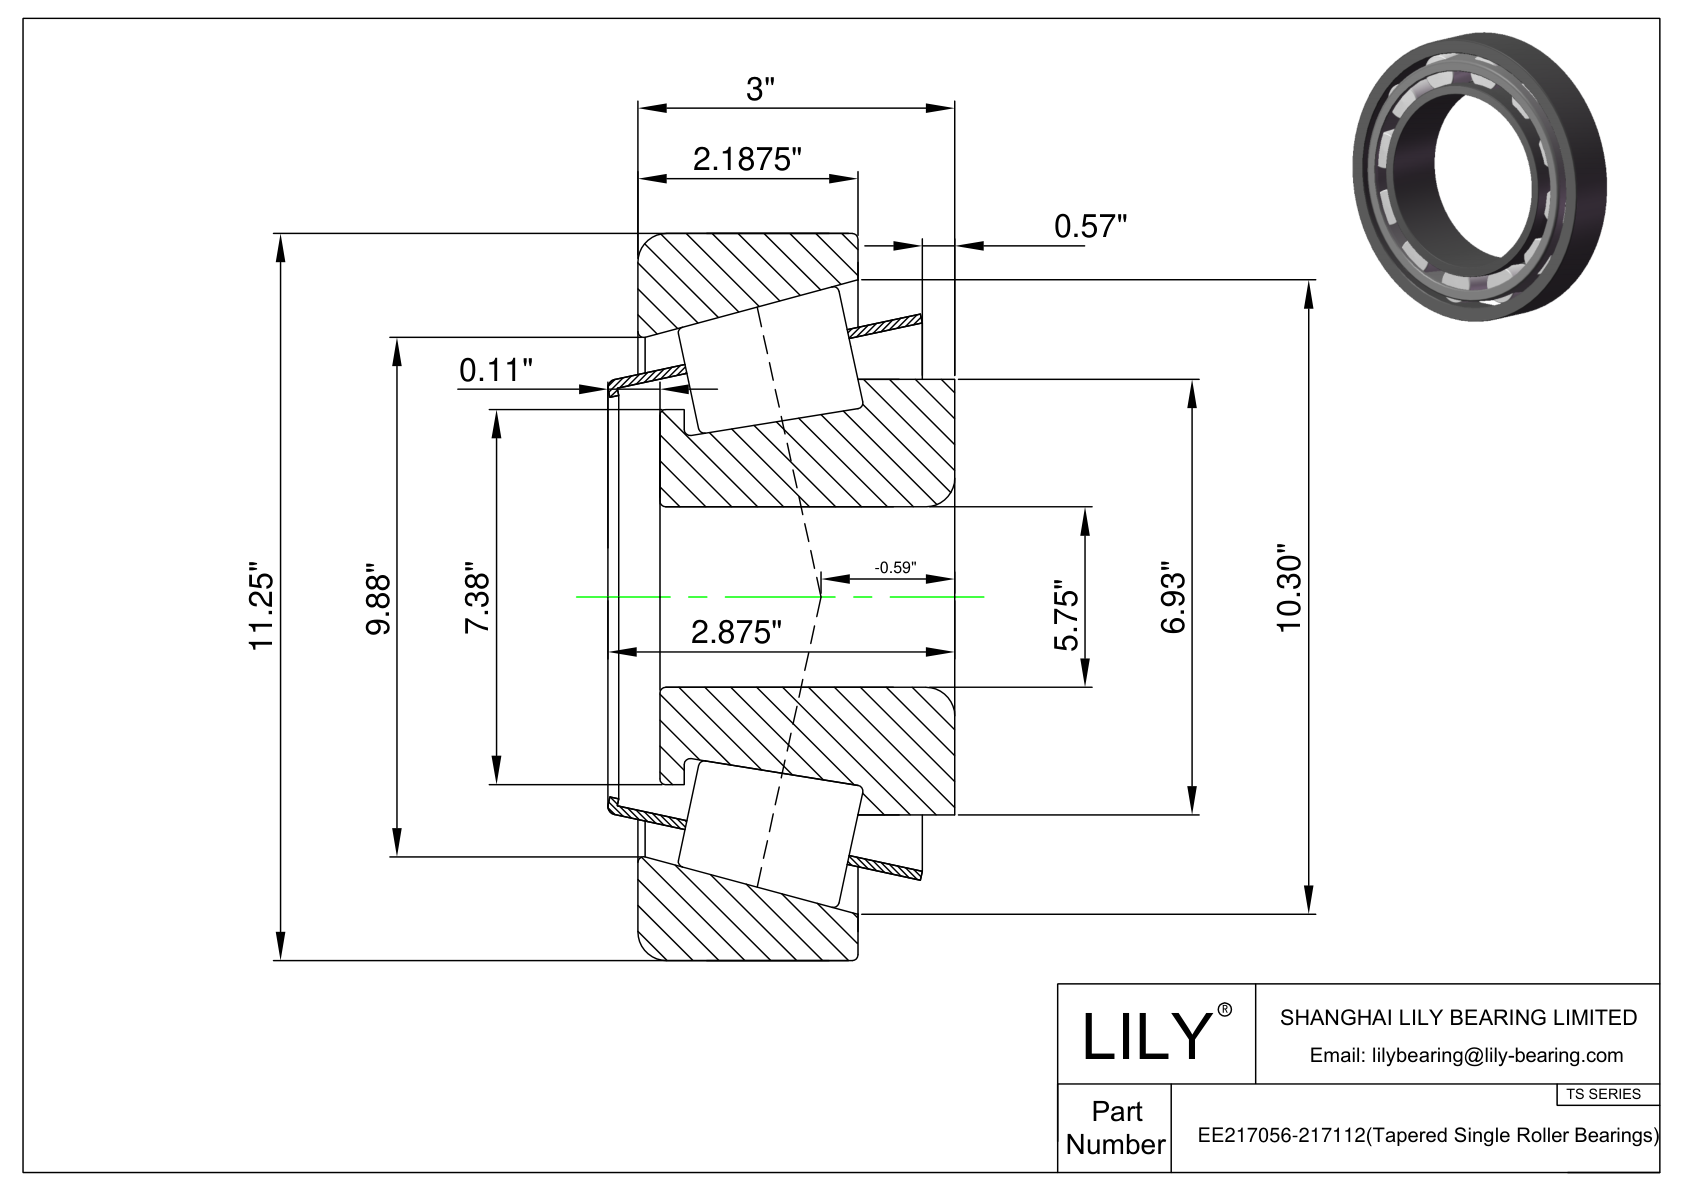 EE217056-217112 TS (Tapered Single Roller Bearings) (Imperial) cad drawing